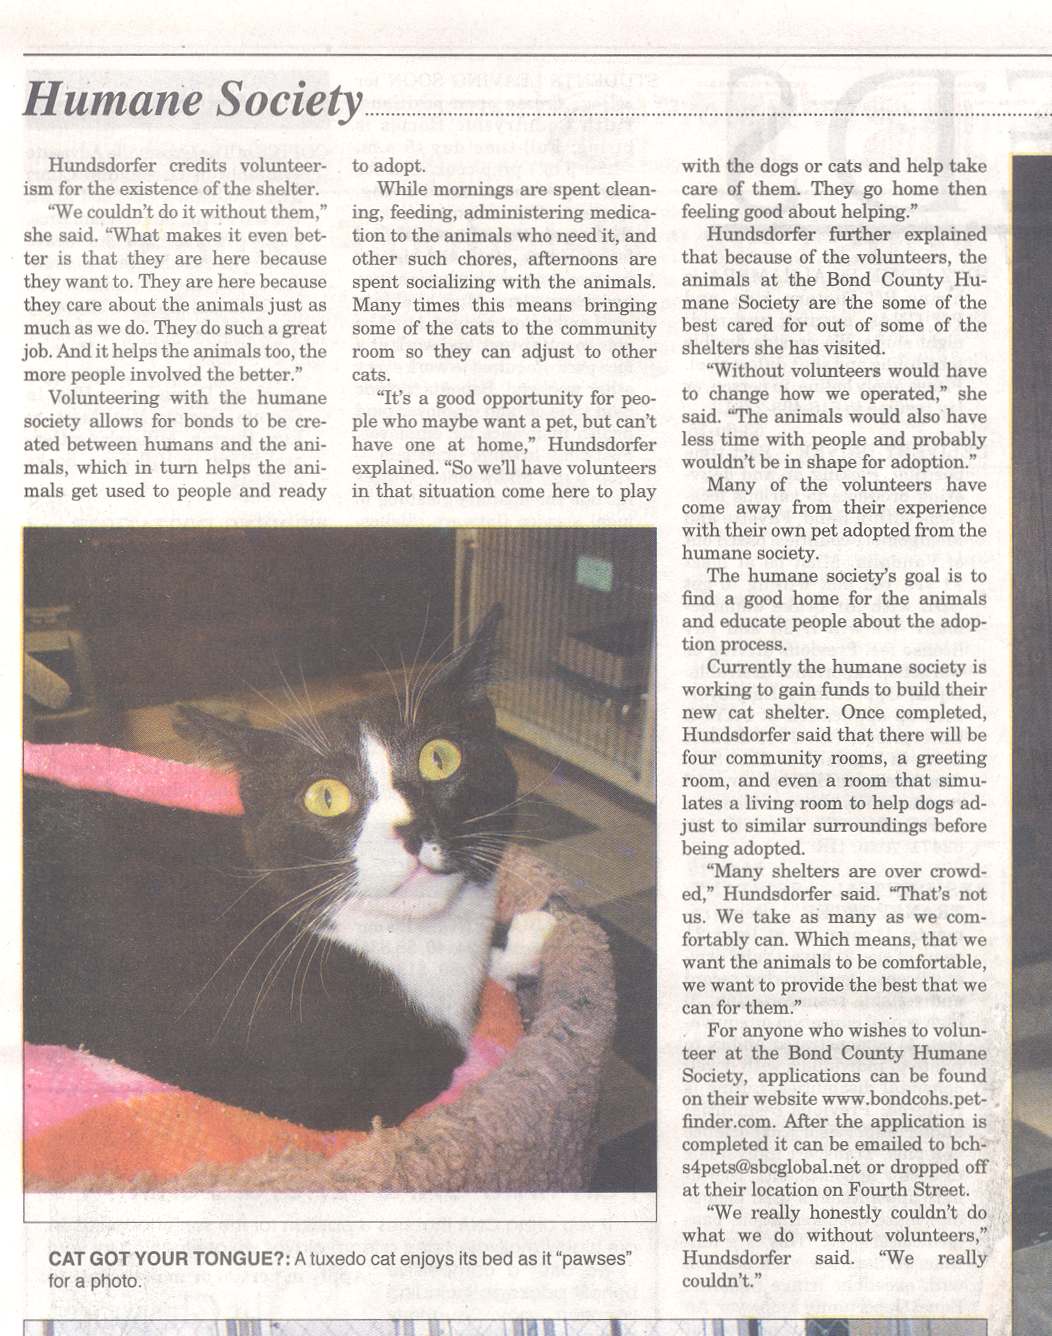 Article part 2 with photo of tuxedo cat in community cat room